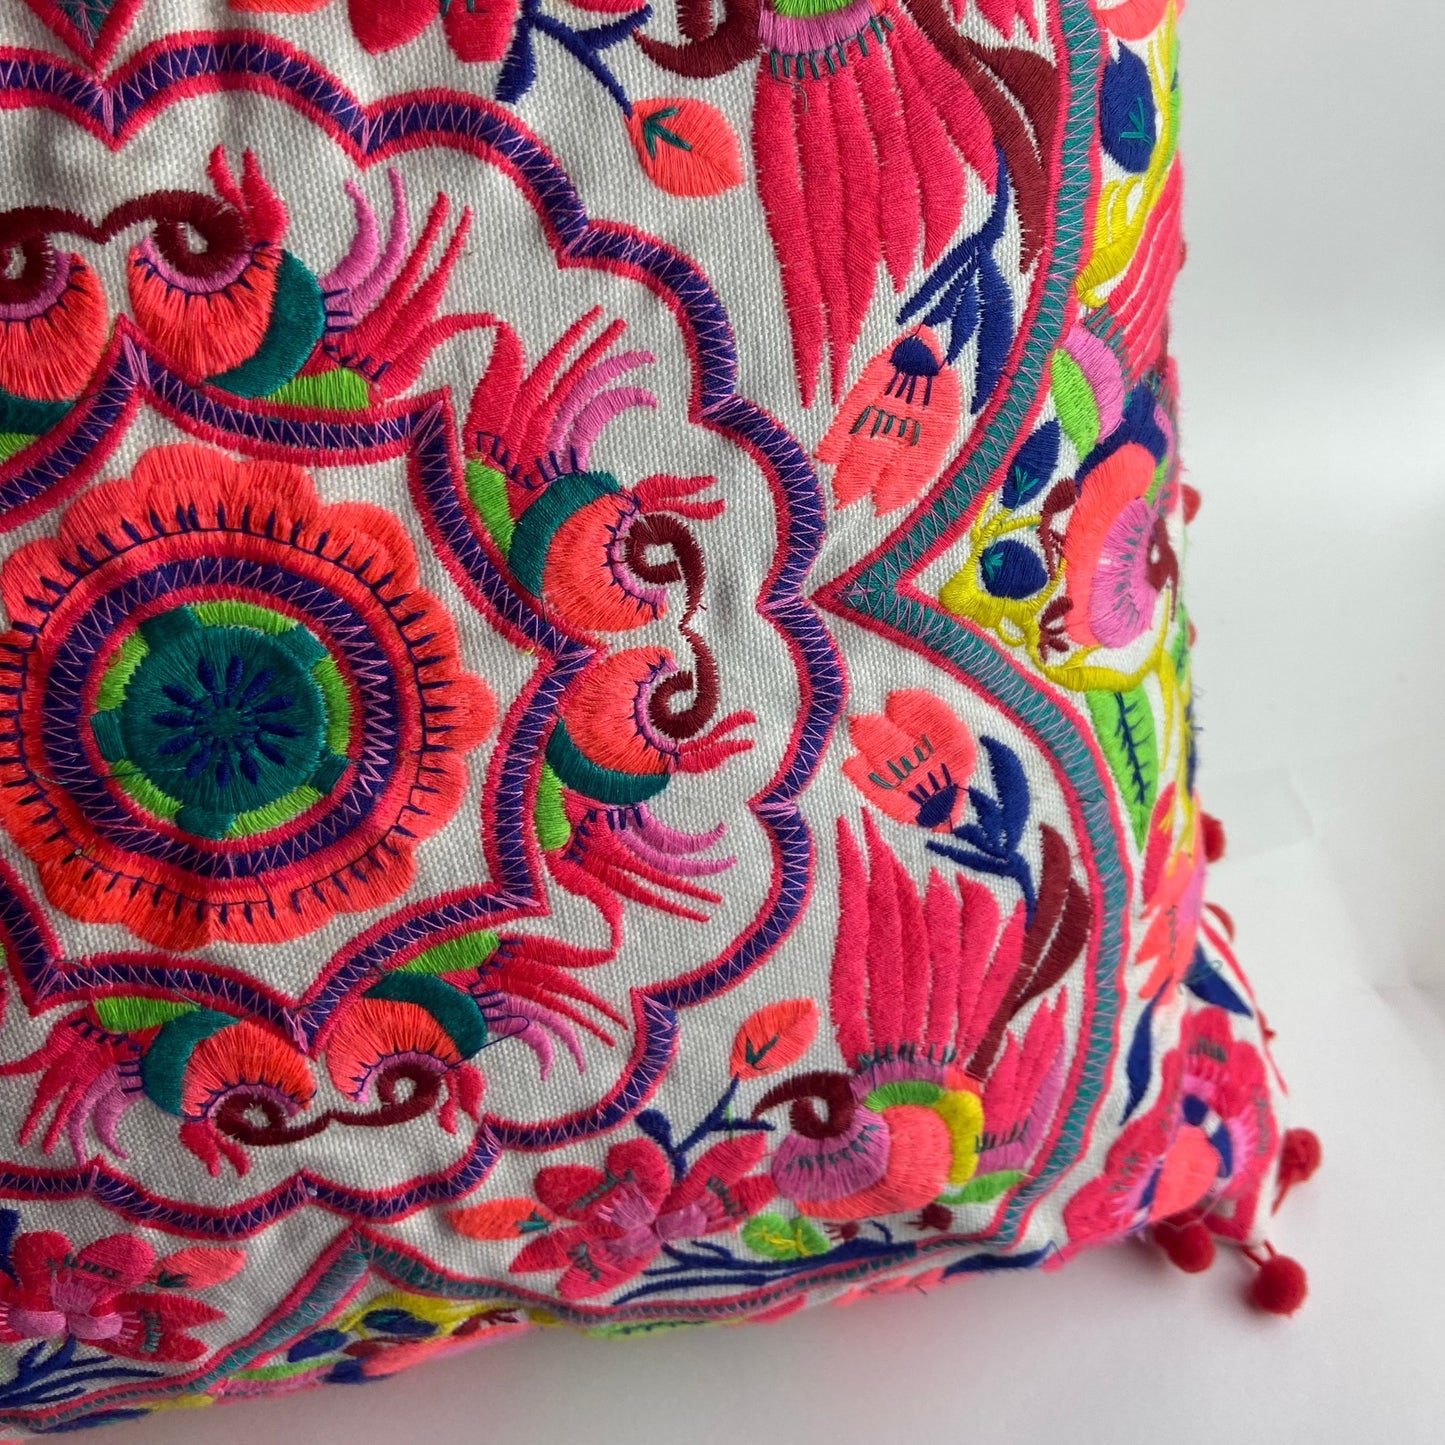 Acapulco Embroidered Cushion by Bombay Duck